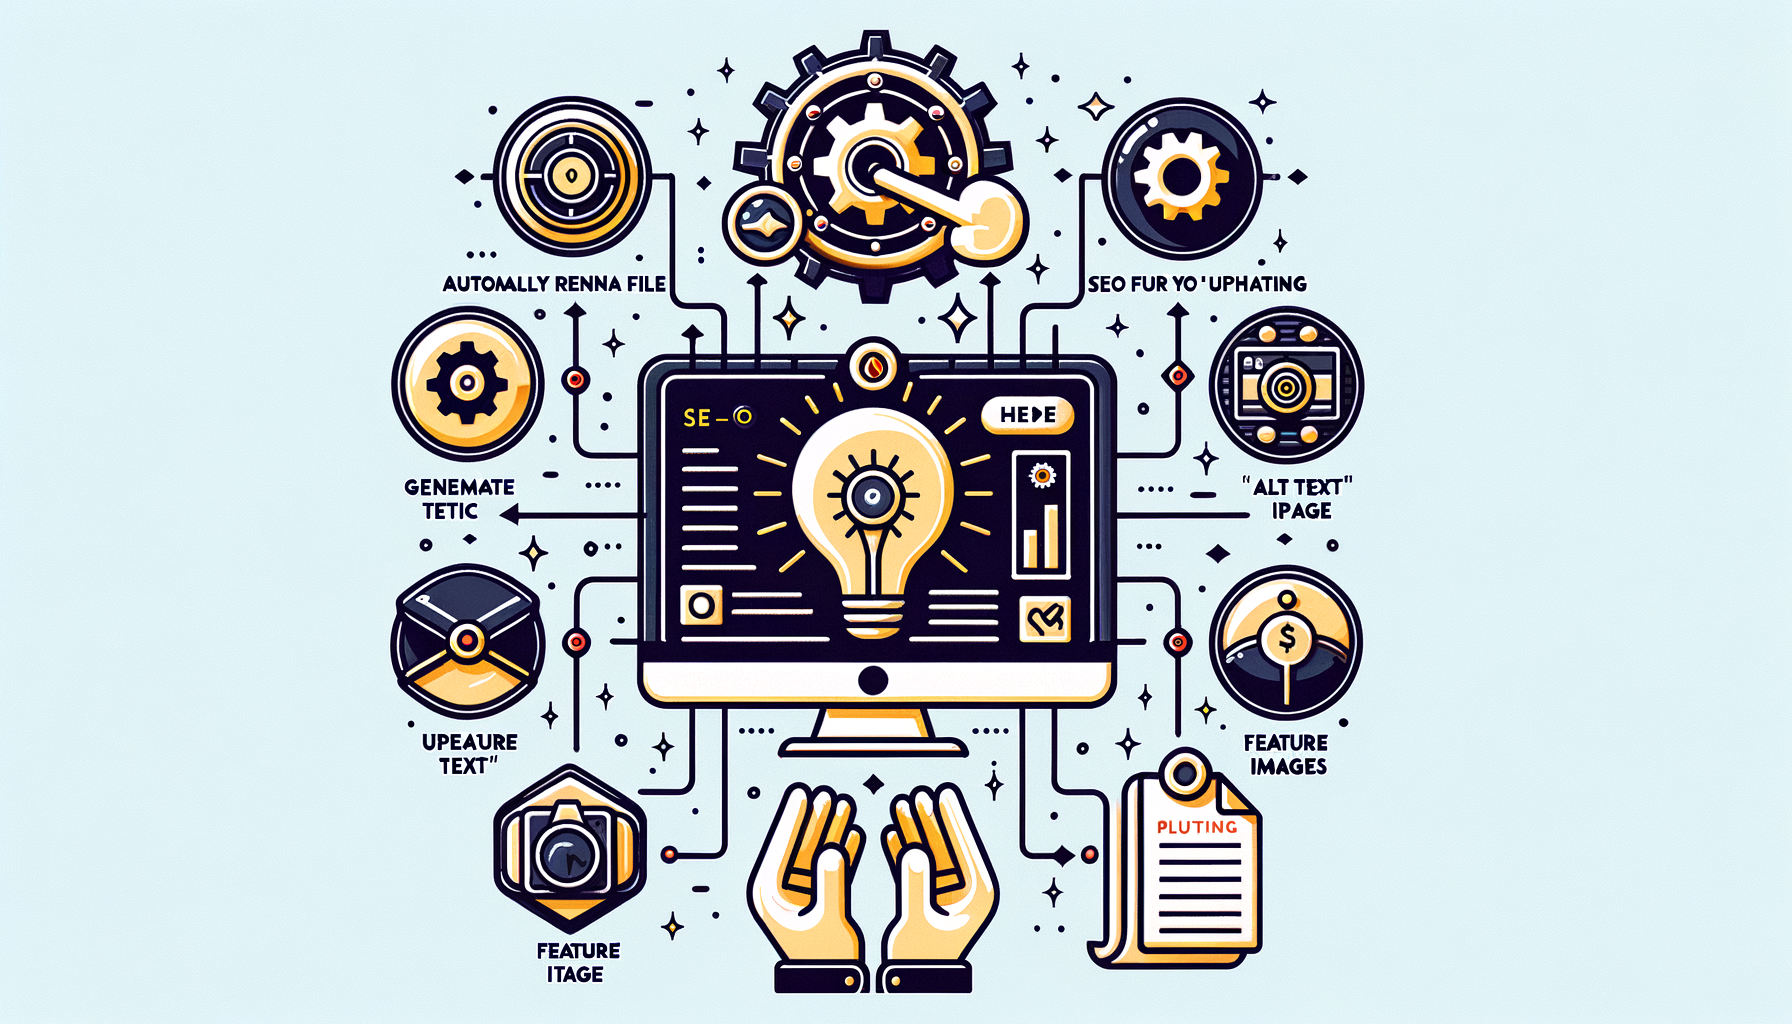 A digital illustration themed around website optimization and SEO (Search Engine Optimization) in a two-tone color scheme, predominantly yellow and dark blue, against a pale blue background. The central image shows hands typing on a laptop keyboard, with the laptop screen displaying a magnifying glass symbolizing search, surrounded by various icons. These icons represent different aspects and tools of SEO and website maintenance, such as gears, graphs, cloud computing, a globe with magnifying glass, and document symbols. Text labels such as "Automatically Renewal SSL," "SEO," "Update Text," and "Feature Images" are integrated within the design to describe each icon's function. The overall image is constructed in a network style arrangement, suggesting the interconnected nature of the different components of web management.